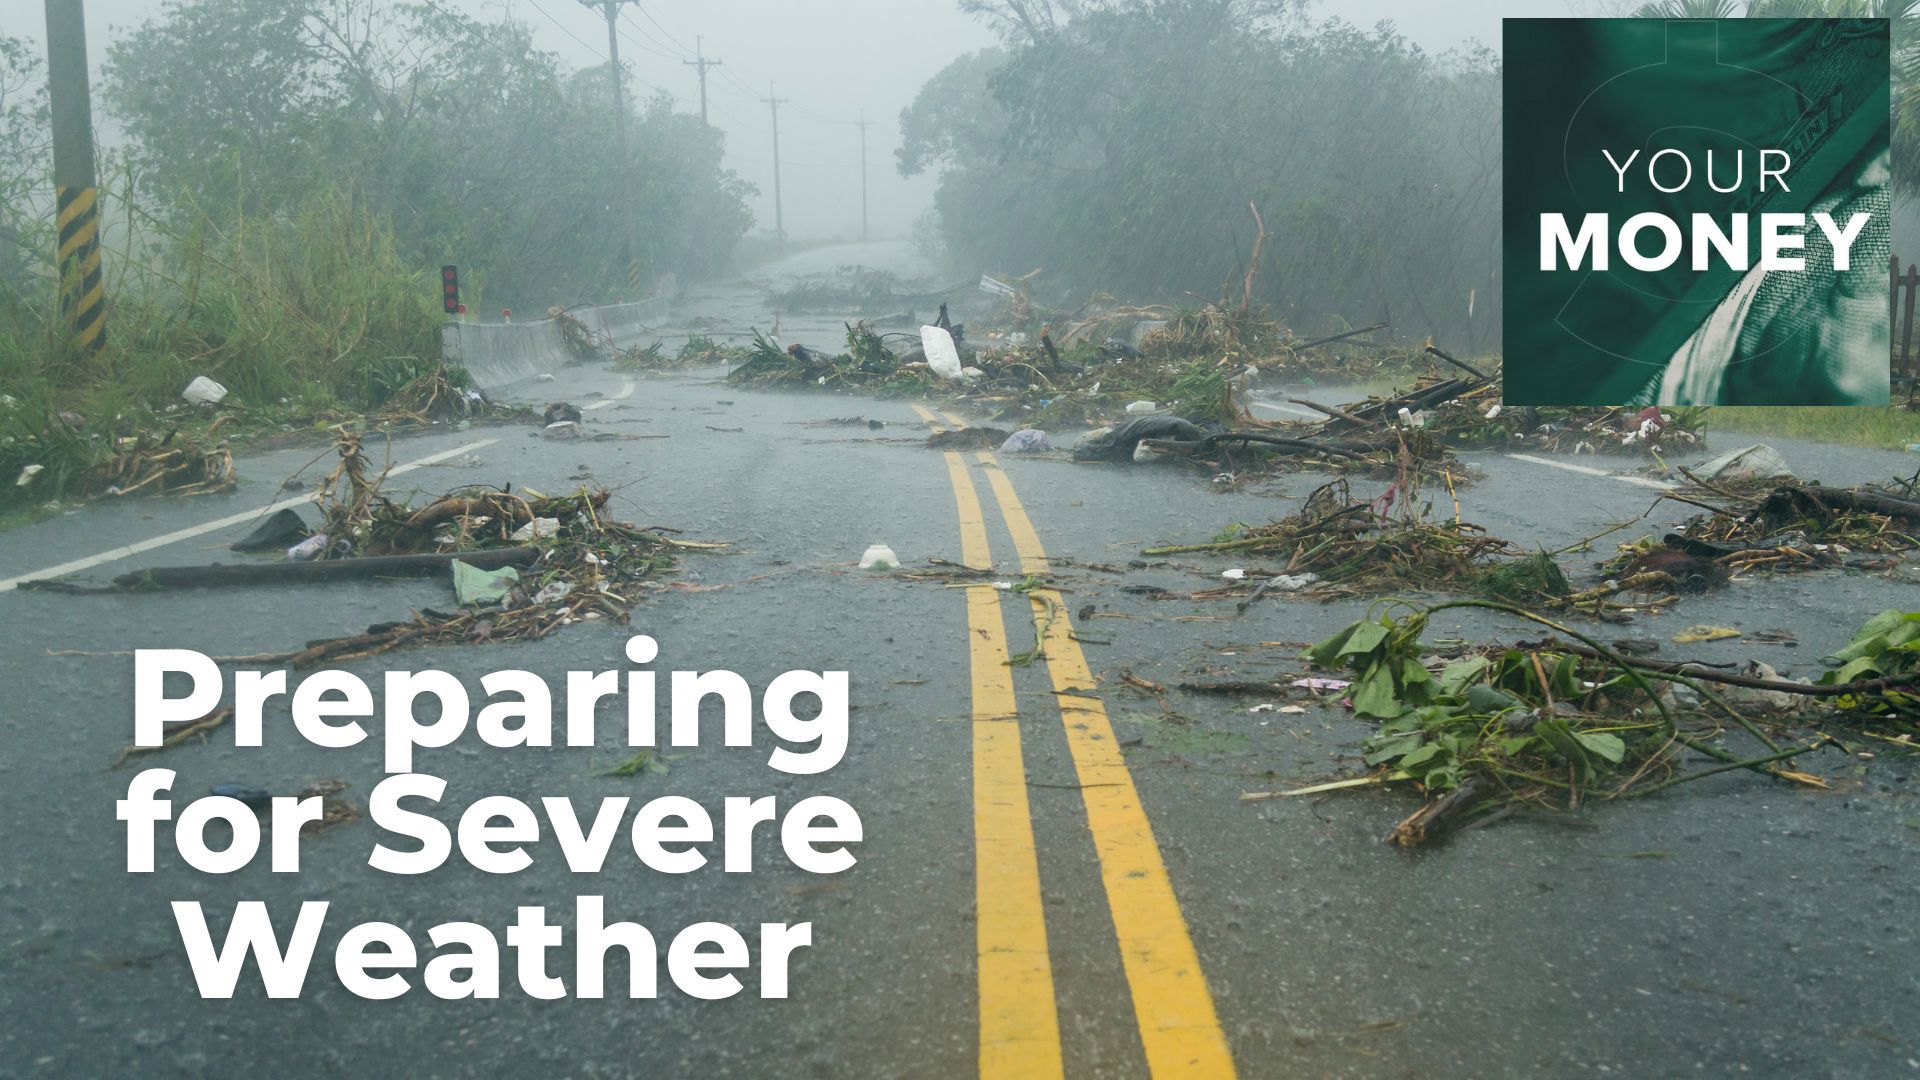 Gordon Severson shares how to prepare for severe weather. What you should do if your home is damaged, the protections you need and tips to help save you money.